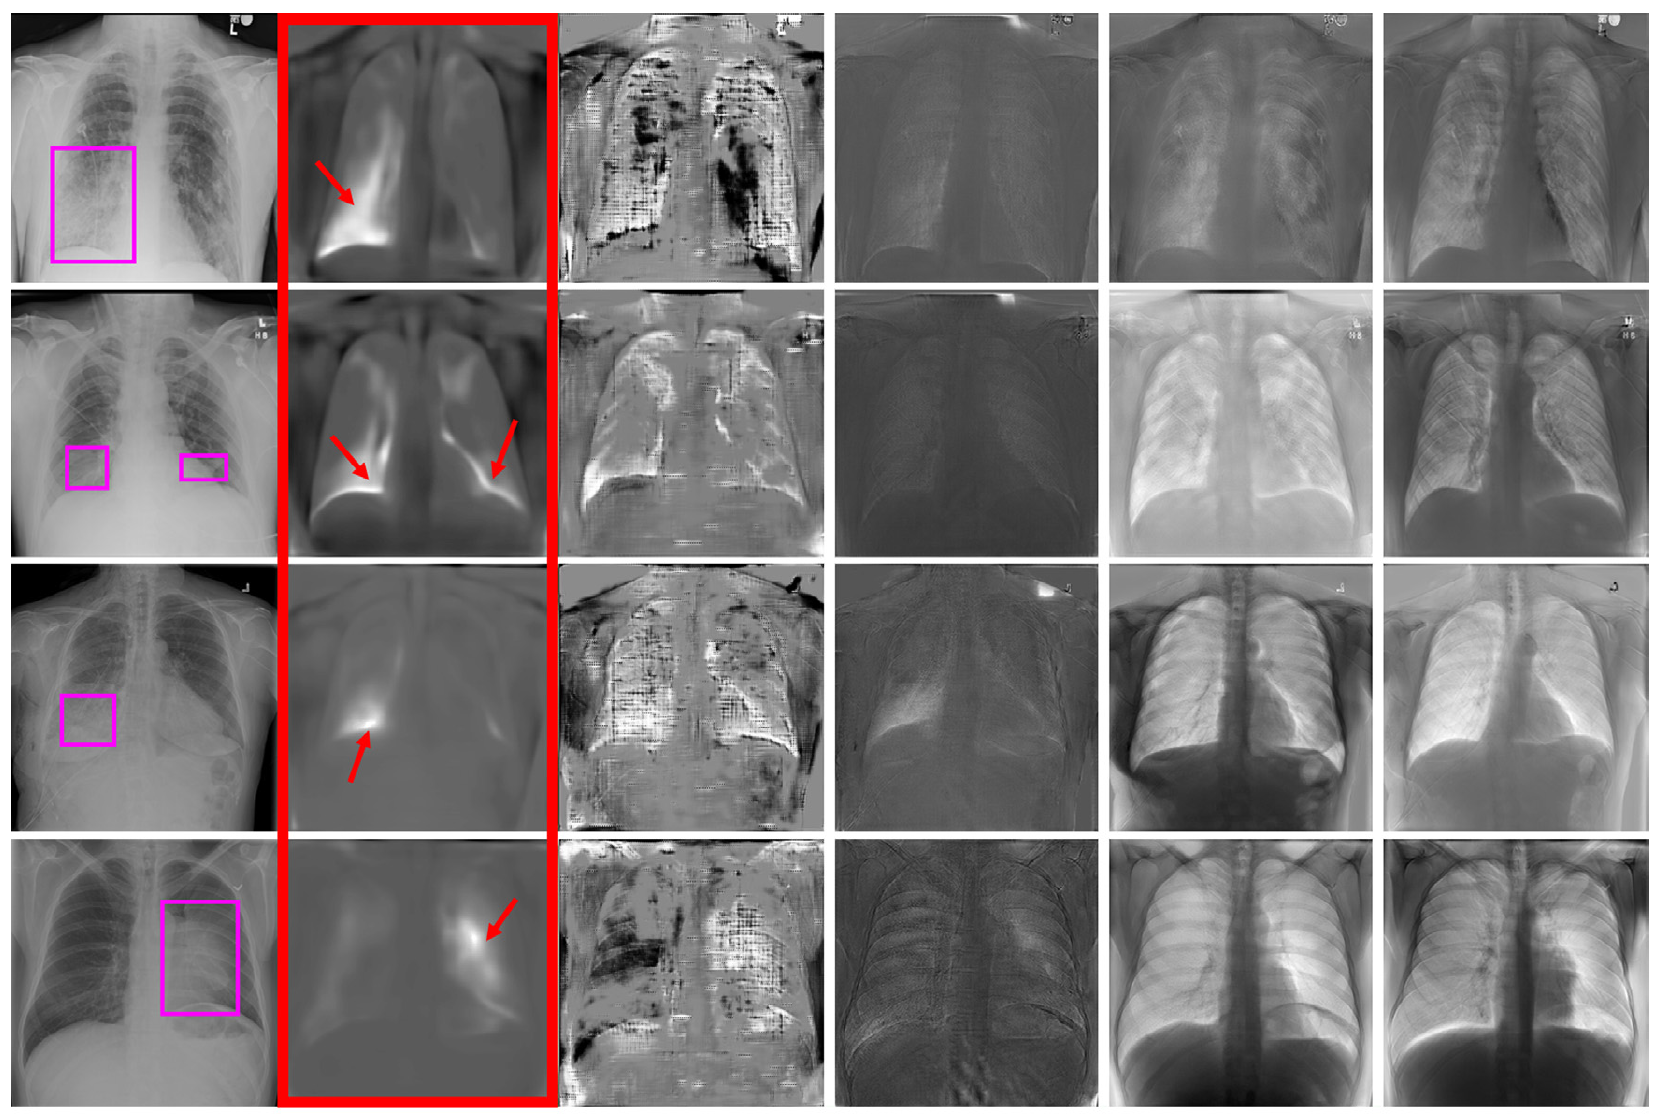 [Paper Review] A disentangled generative model for disease decomposition in chest X-rays via normal image synthesis_2편